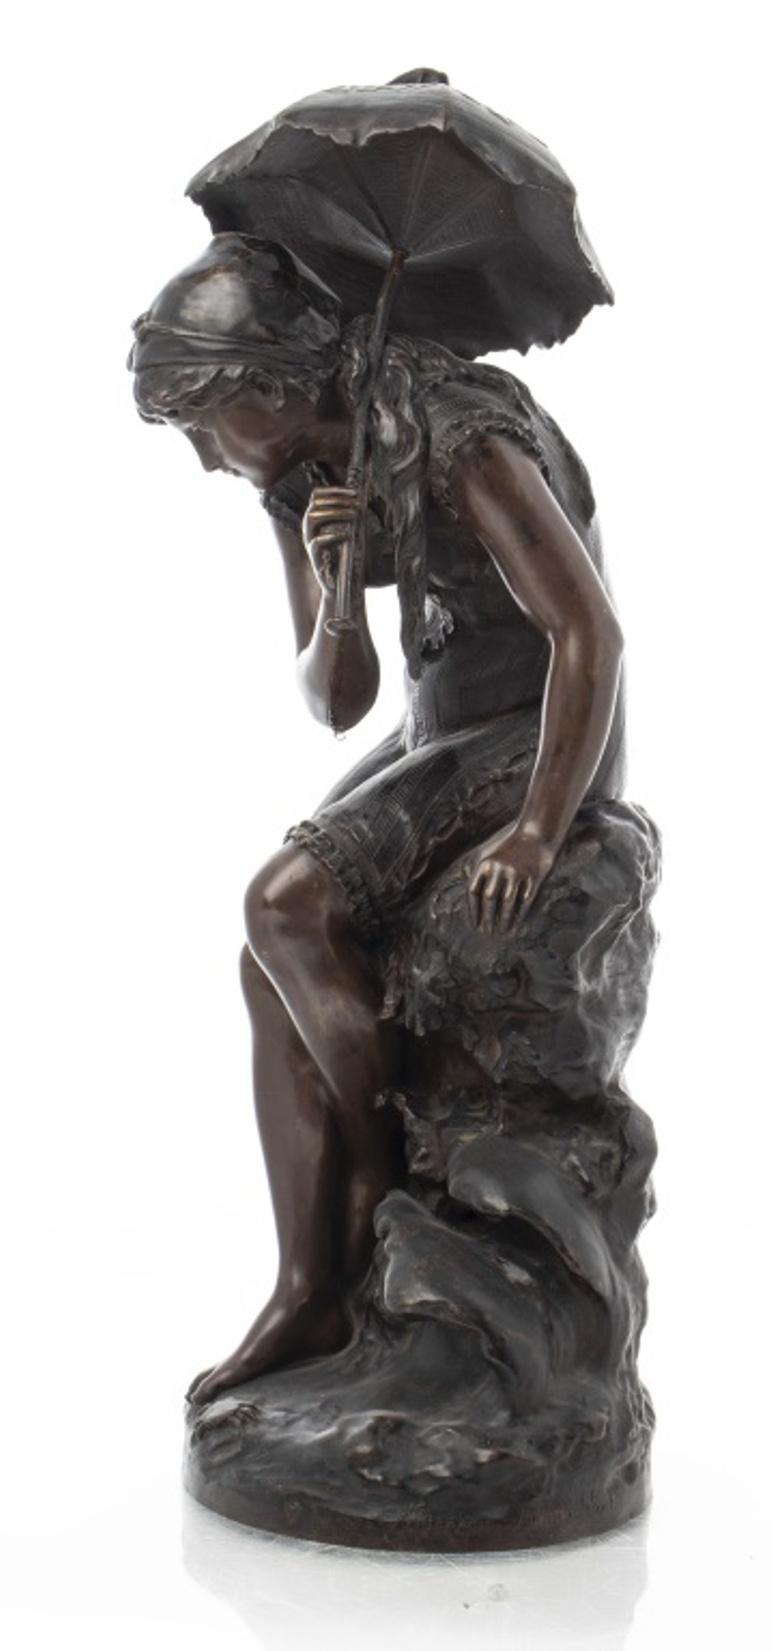 Mathurin Moreau (French, 1822 - 1912) bronze sculpture of young woman under an umbrella peering down at a crab by her feet, bearing signature 